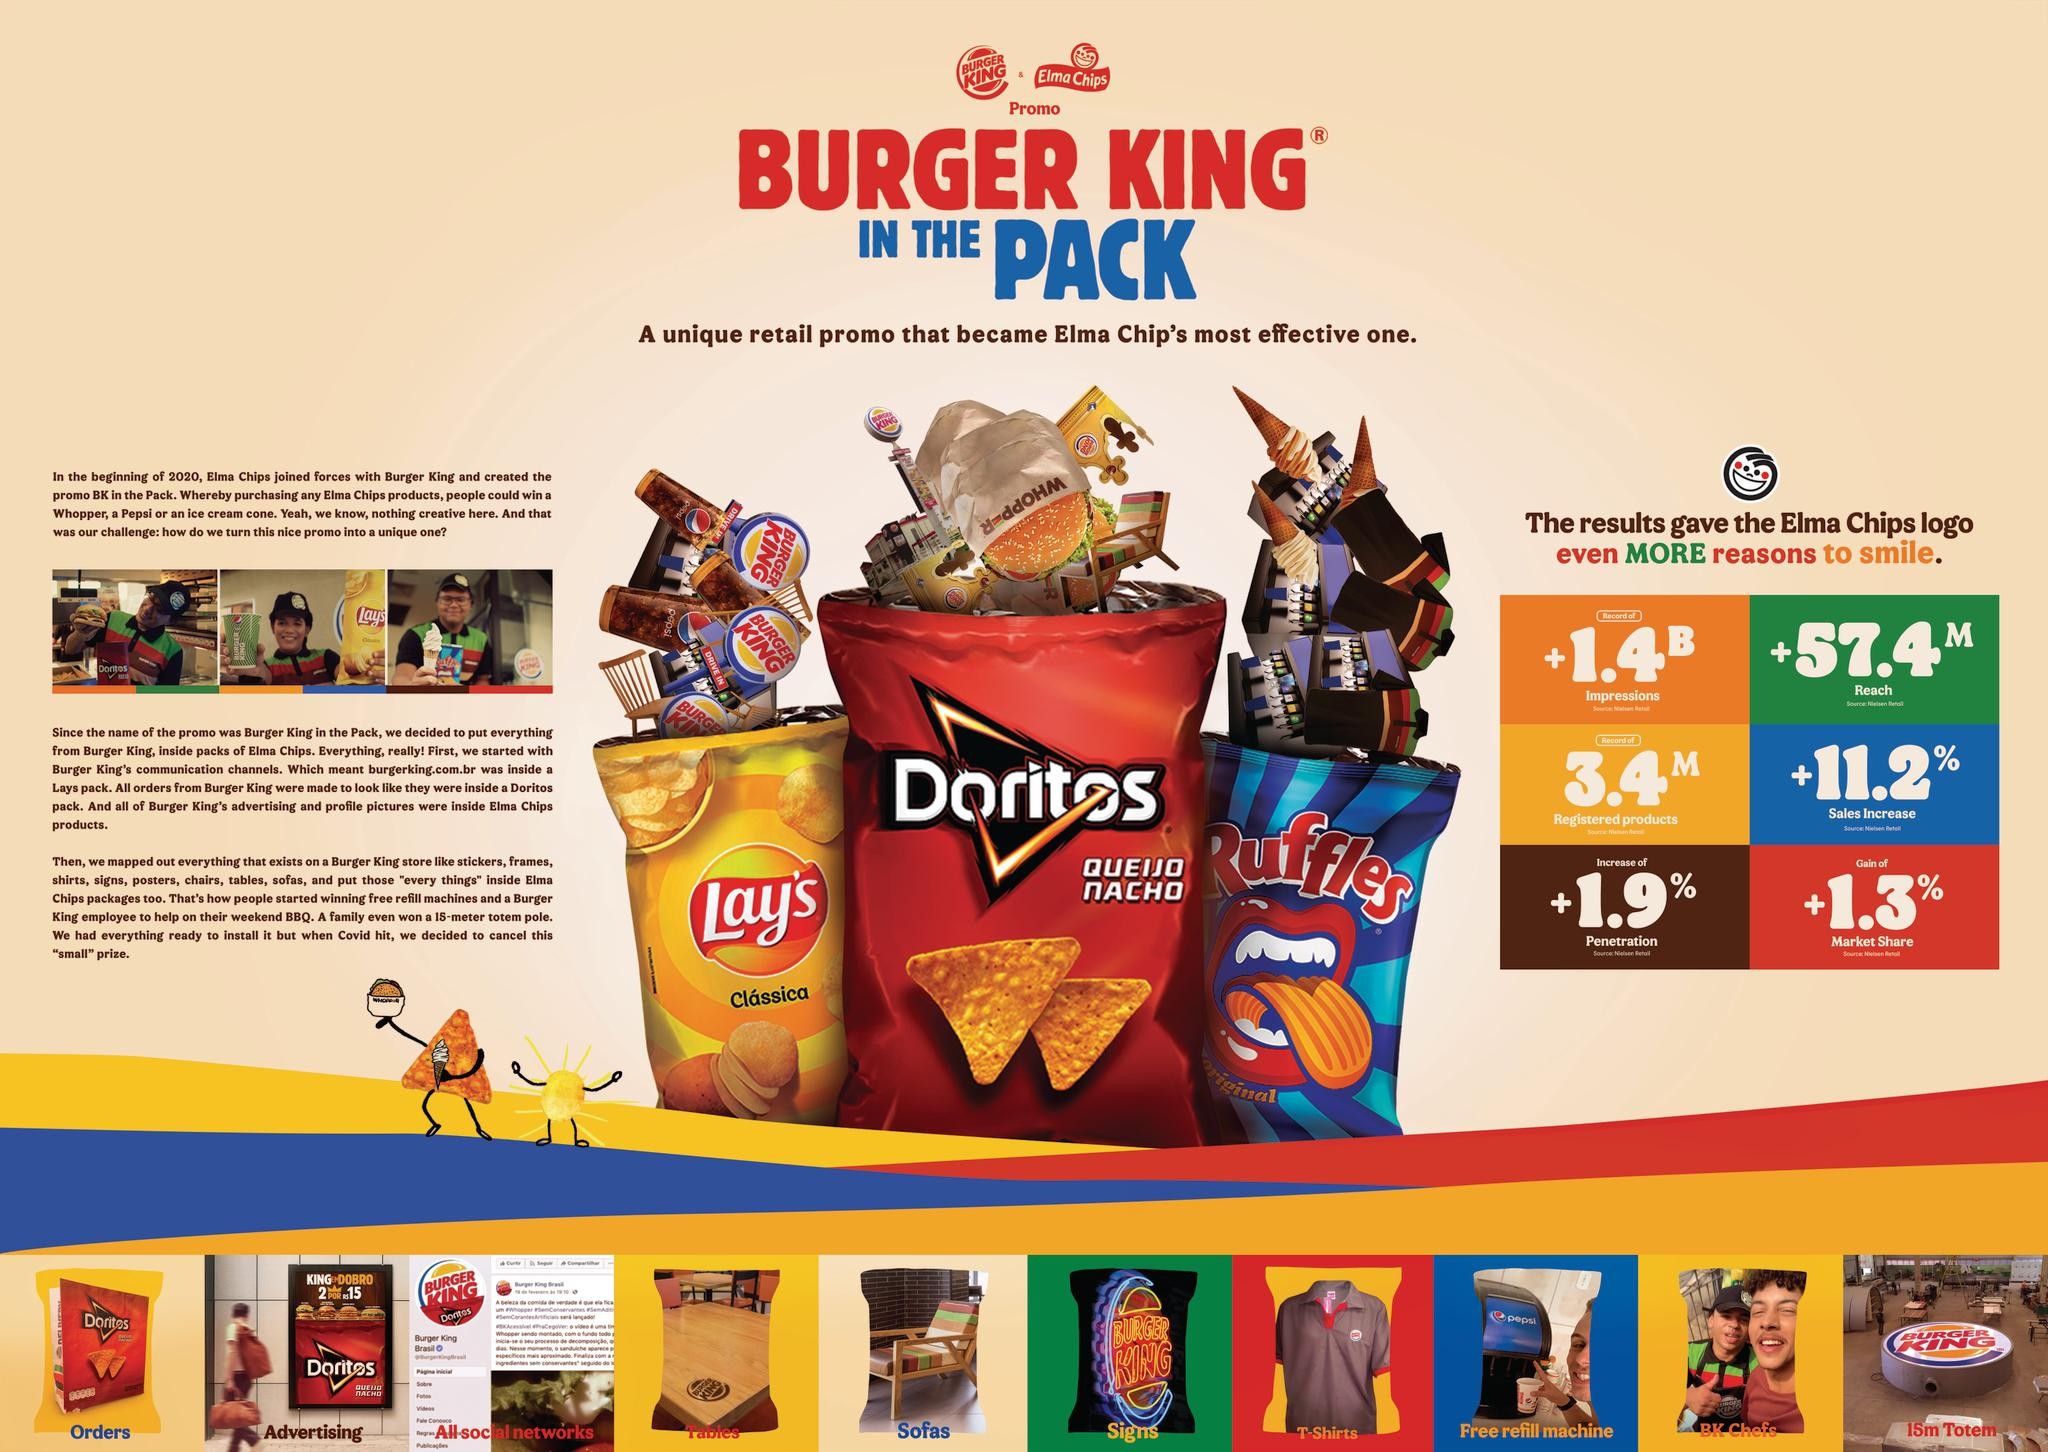 Elma Chips & Burger King in the Pack Promo